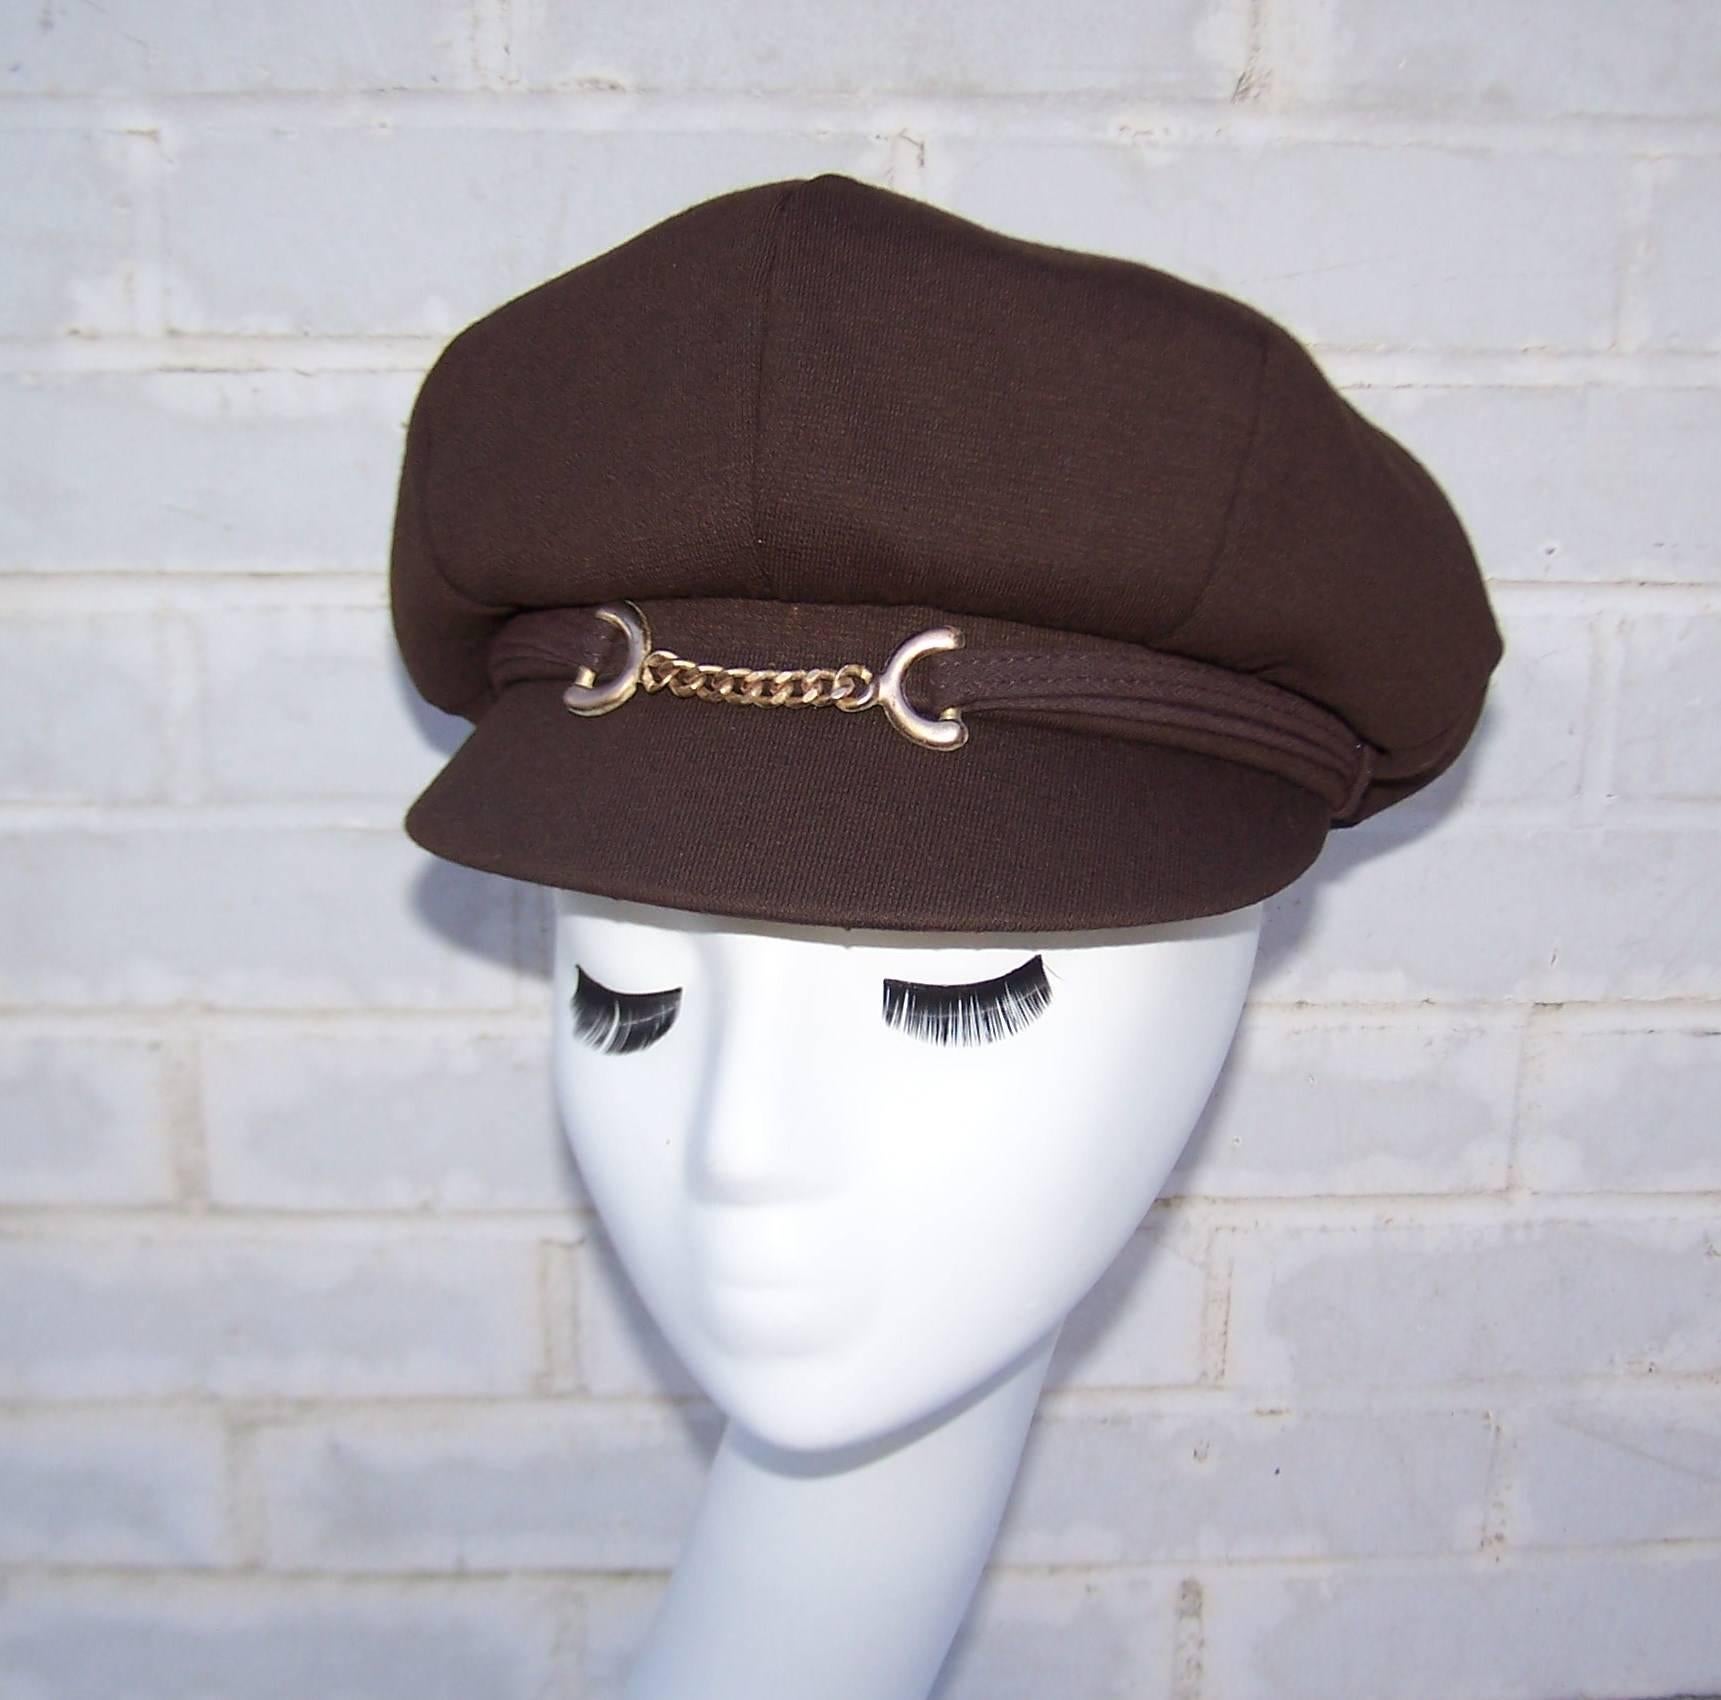 What a great vintage accessory to add to your modern day look!  This chocolate brown wool knit hat is a newsboy style with a mod 1970's twist.  The brim is accented with a sporty Gucci style horse bit hardware and the crown is topped with a